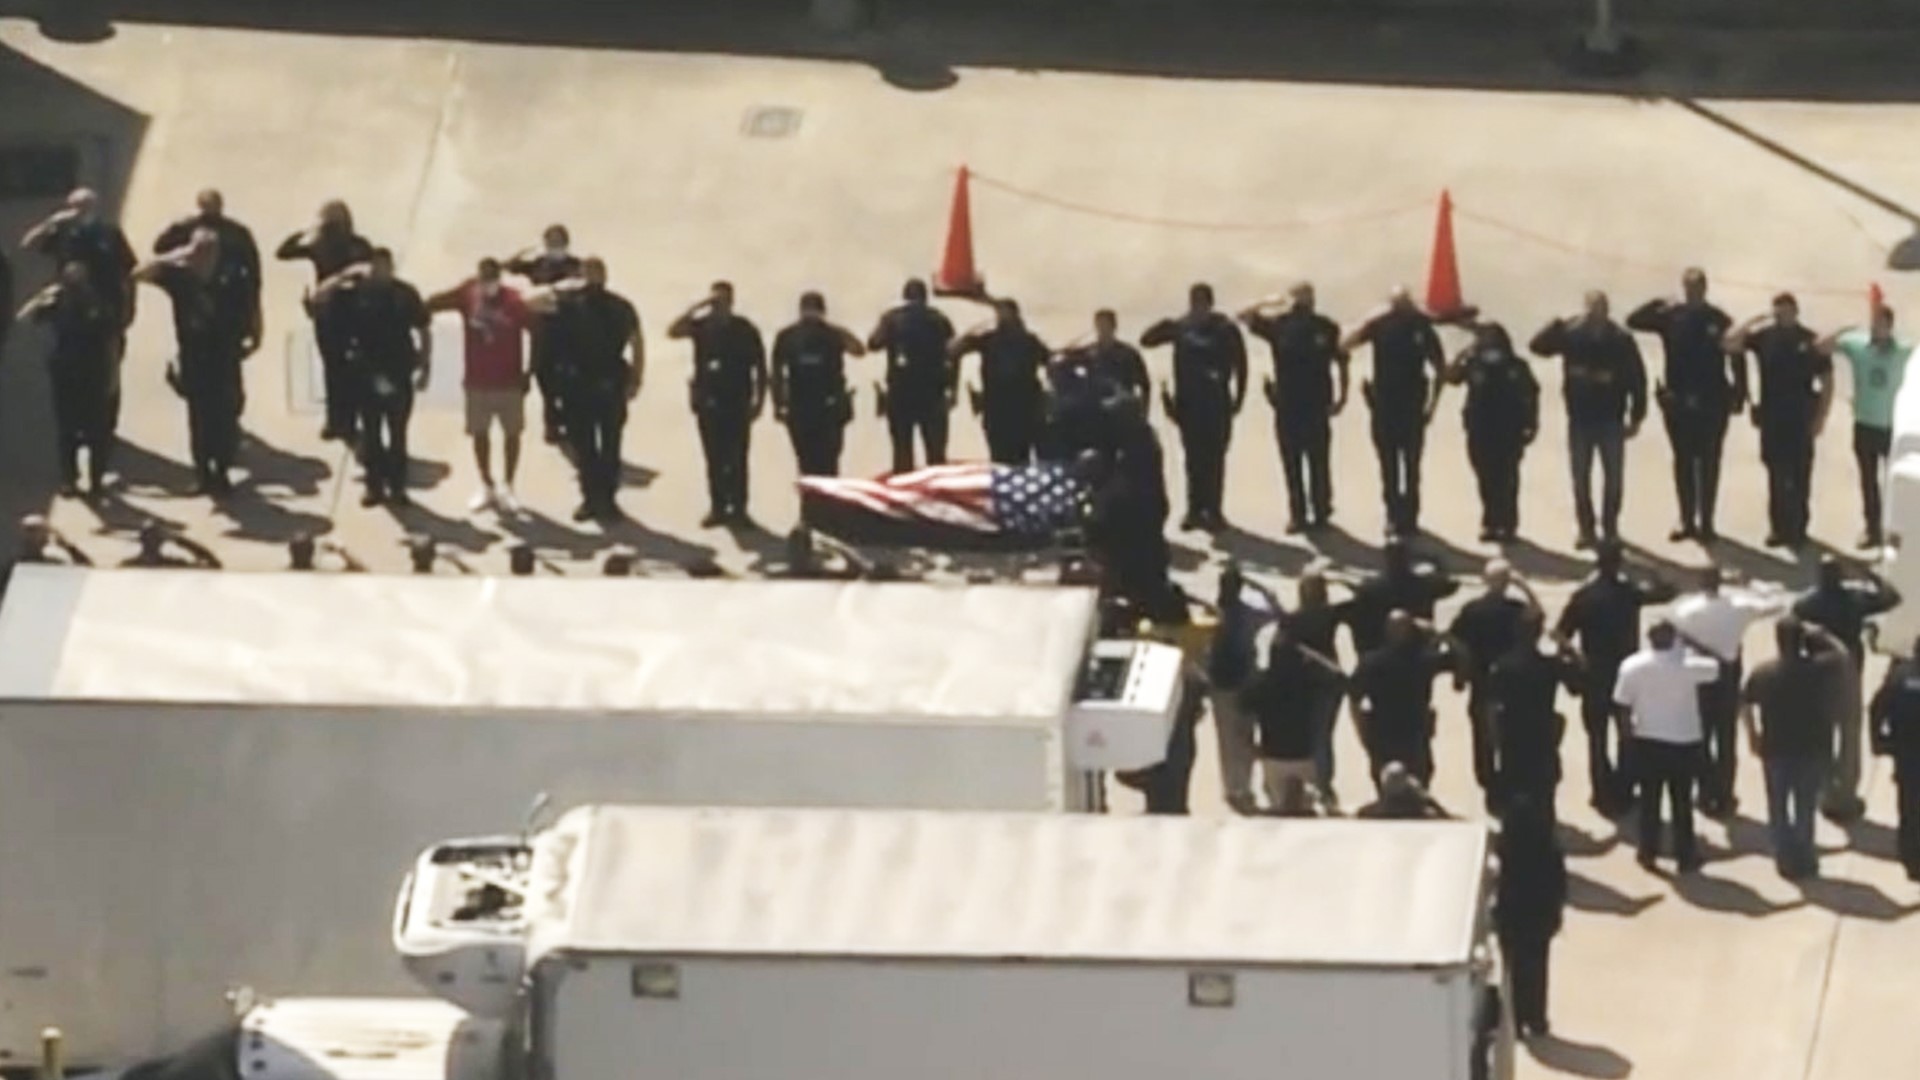 An American flag was draped over the casket of fallen HPD officer William 'Bill' Jeffery as it was removed from a hearse at the medical examiner's office.